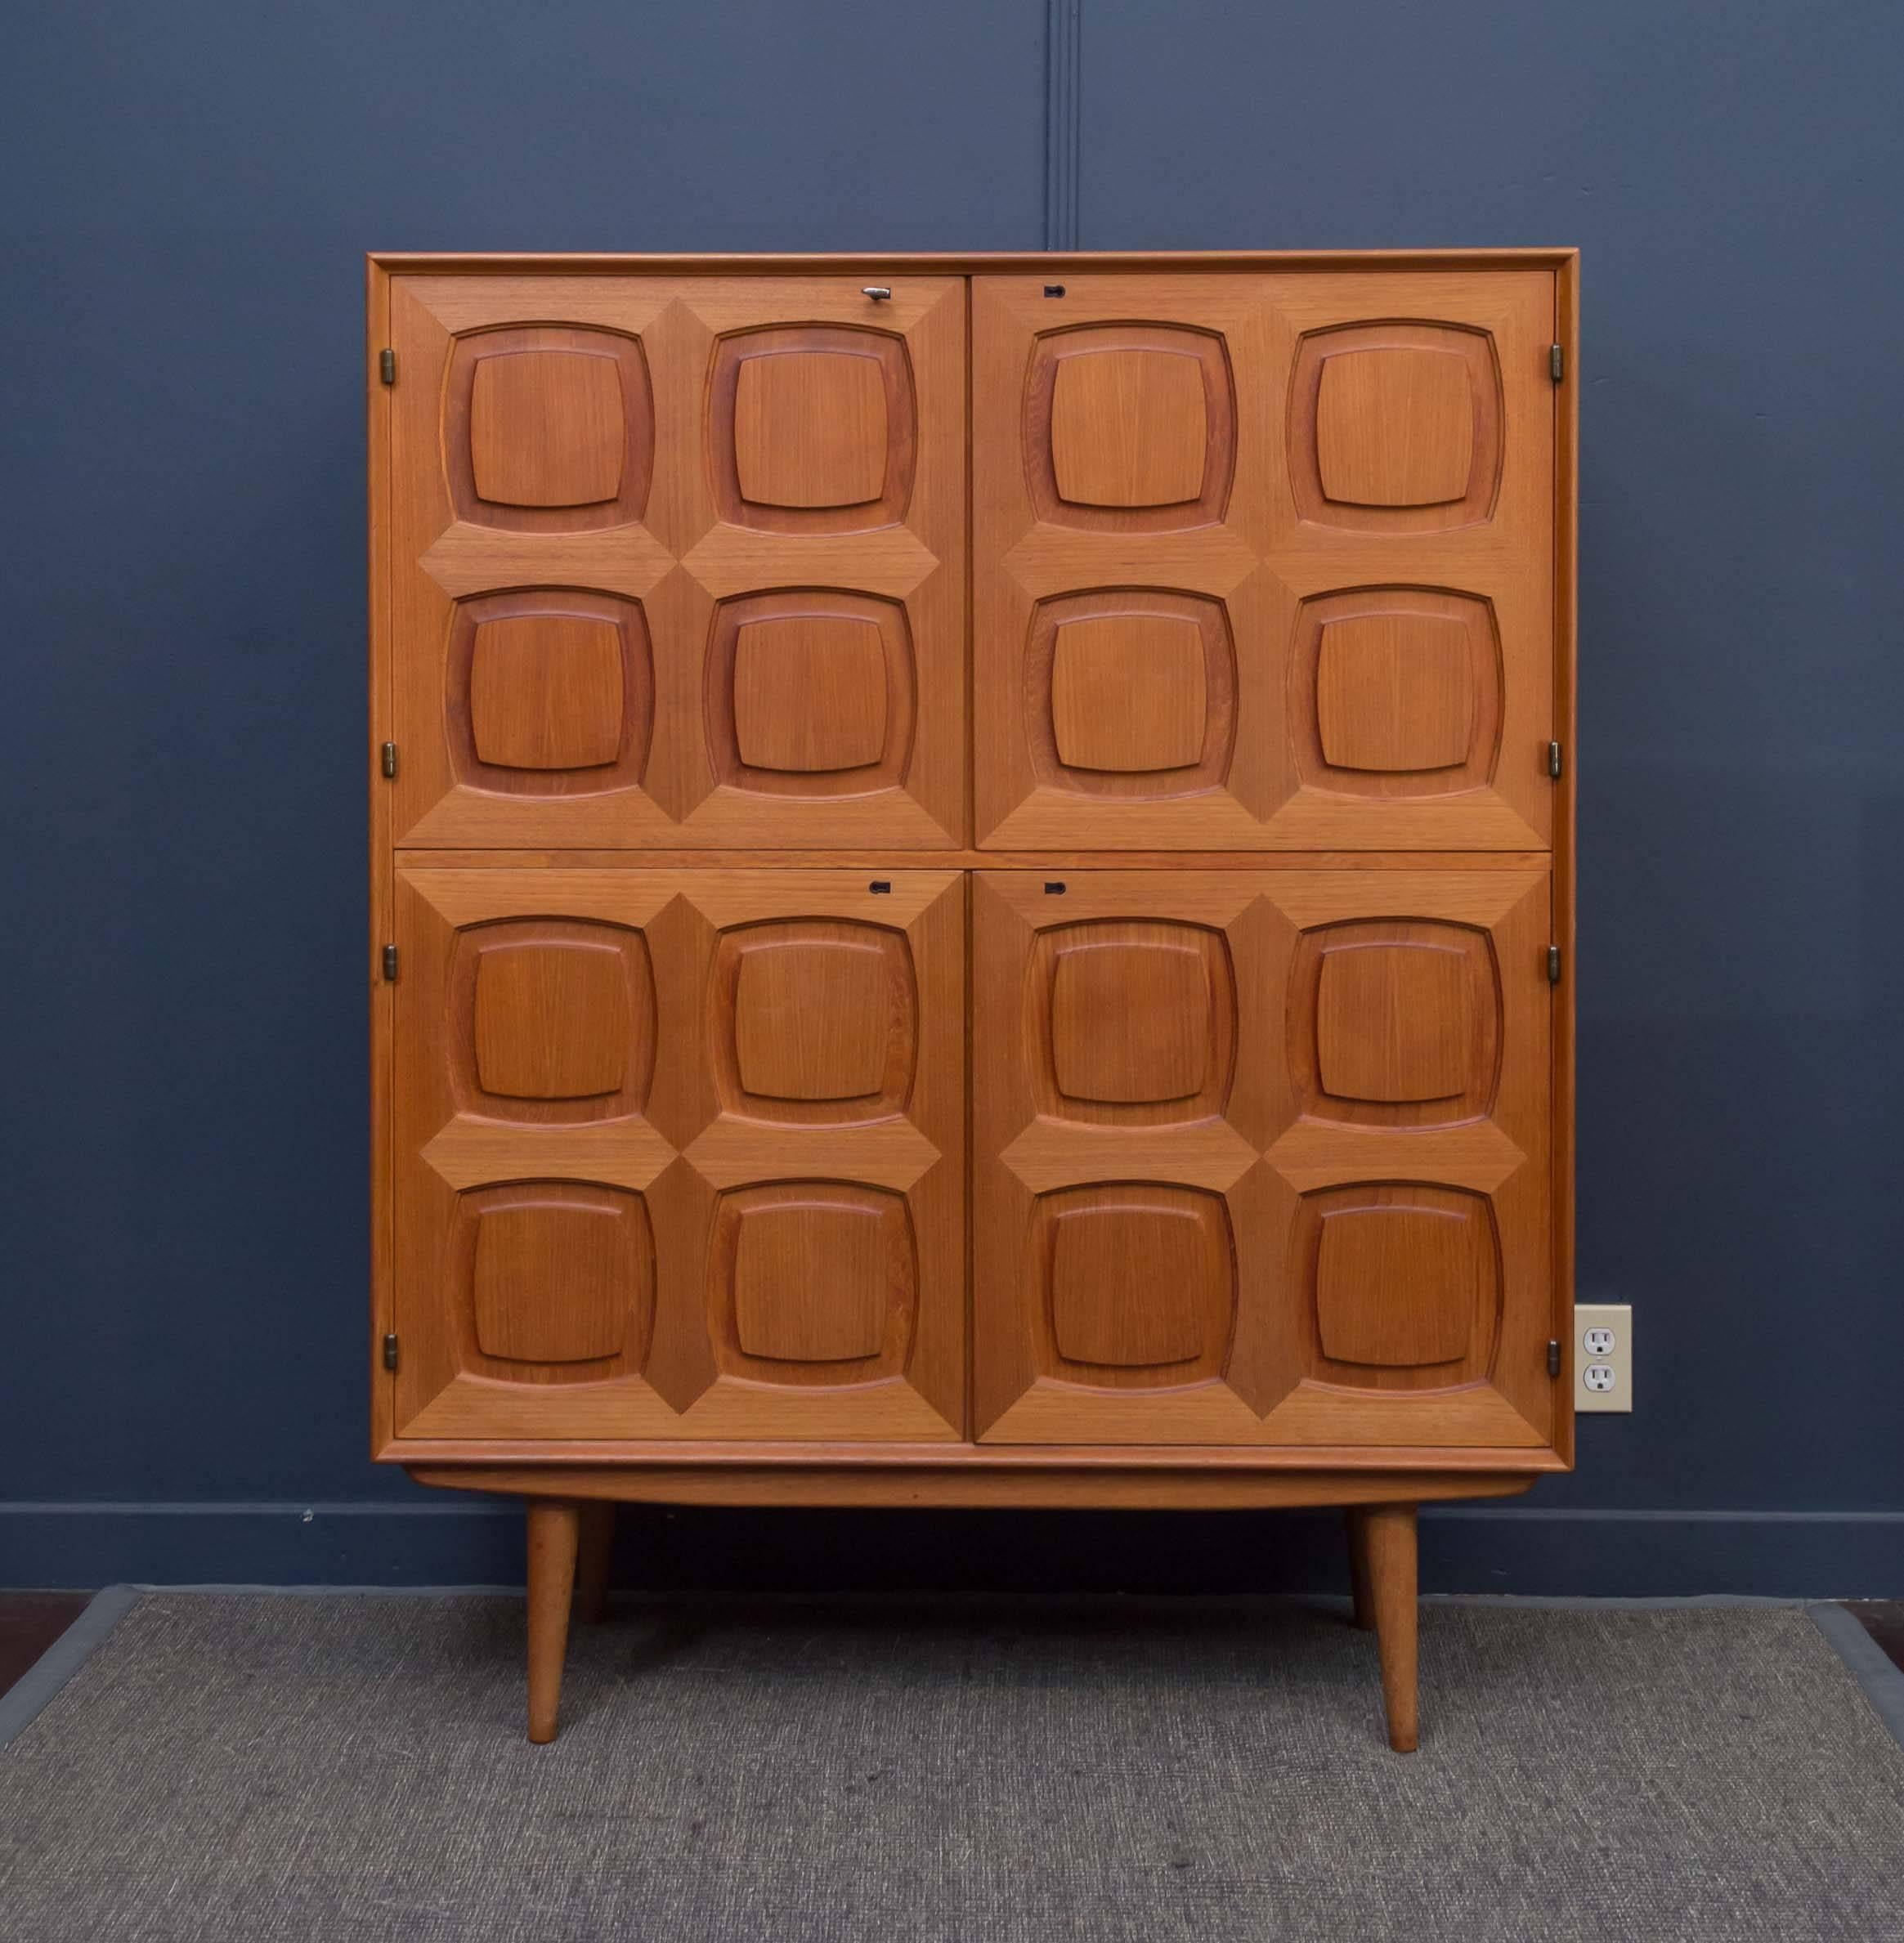 Scandinavian Modern four door cabinet designed by Adolf Rastad and Rolf Relling for Gustav Bahus Norway, designed in 1960s. Handcrafted teak wood doors with individual locks and adjustable shelves. Excellent original condition.